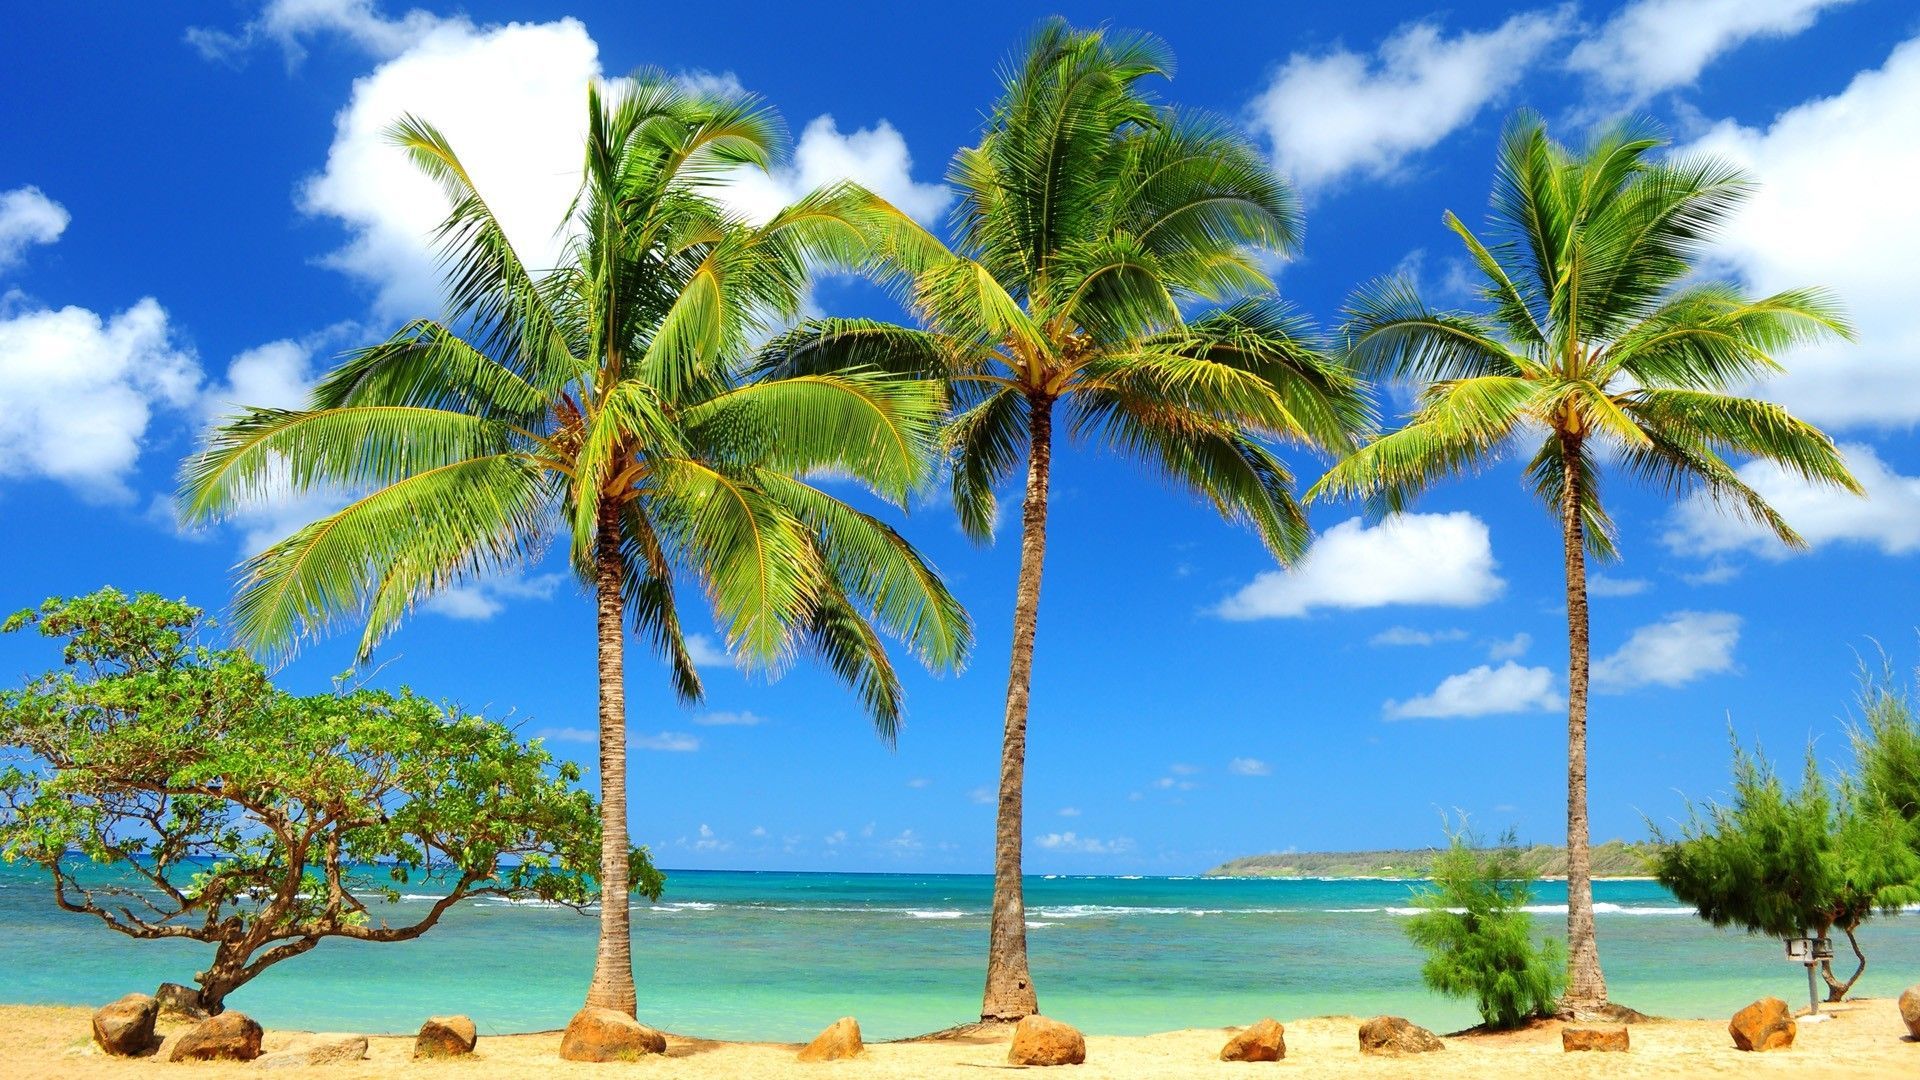 Hawaii HD Wallpapers High Quality for Desktop 